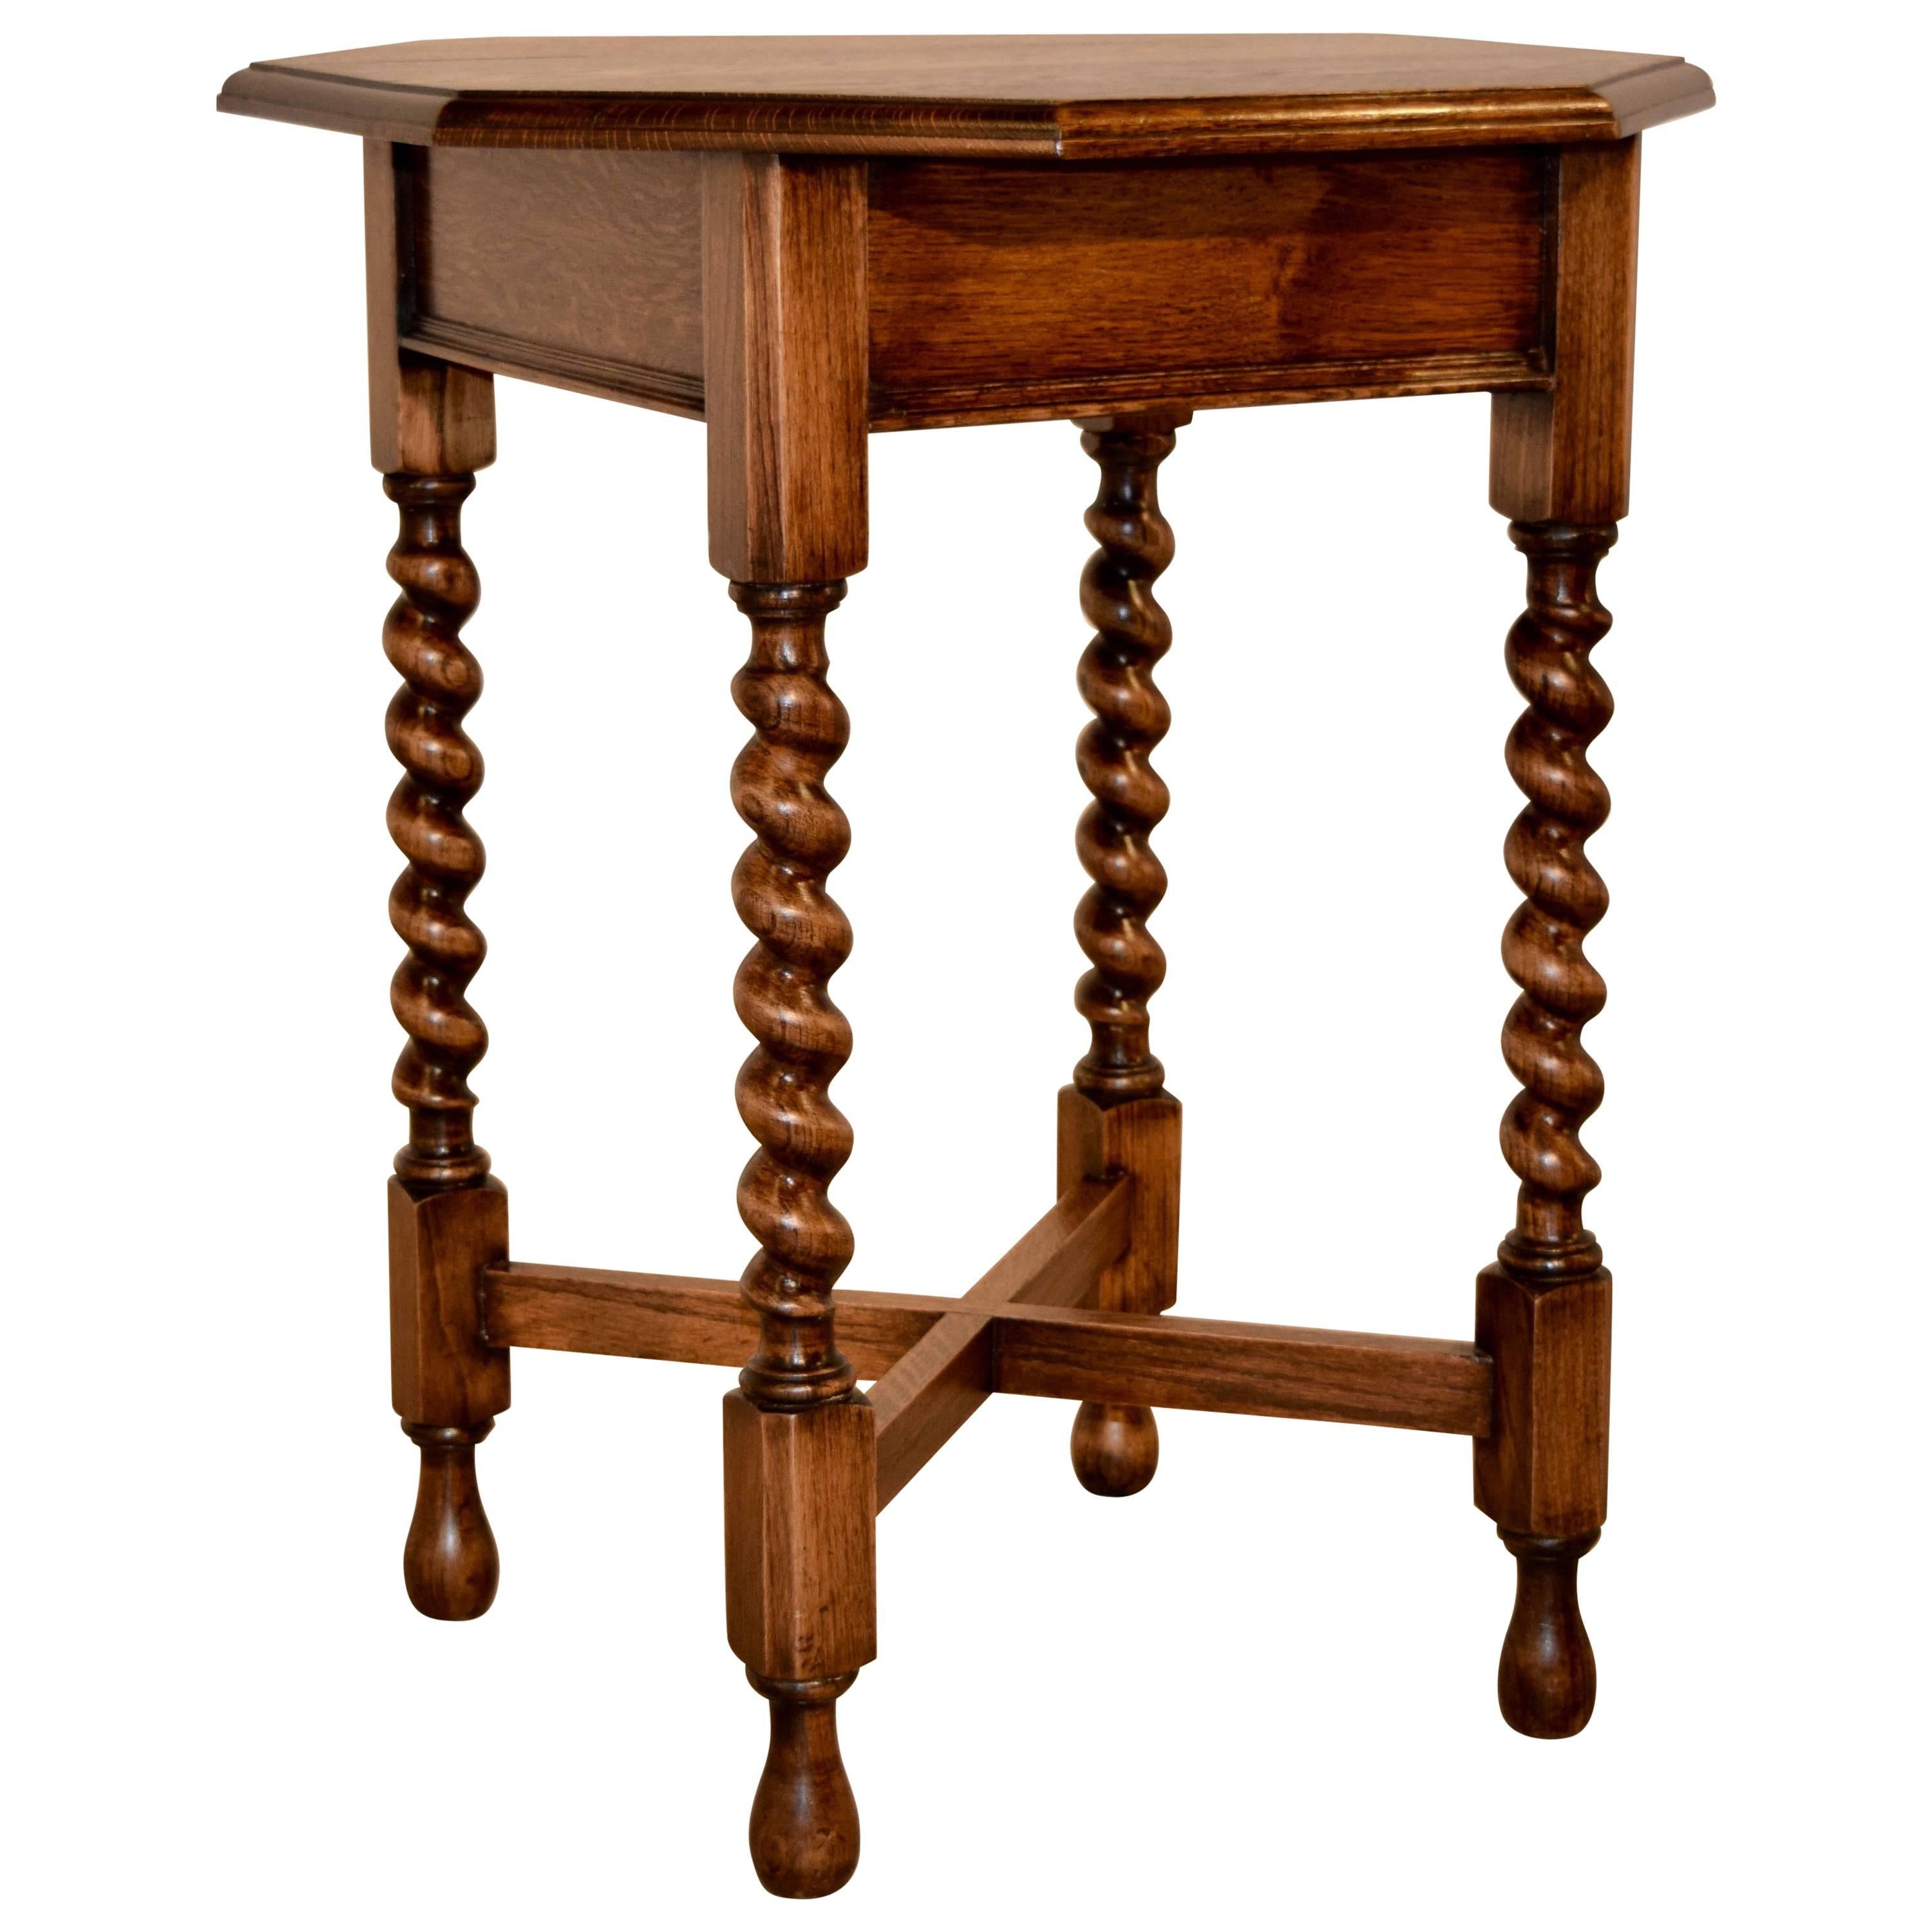 Late 19th Century Octagonal Table